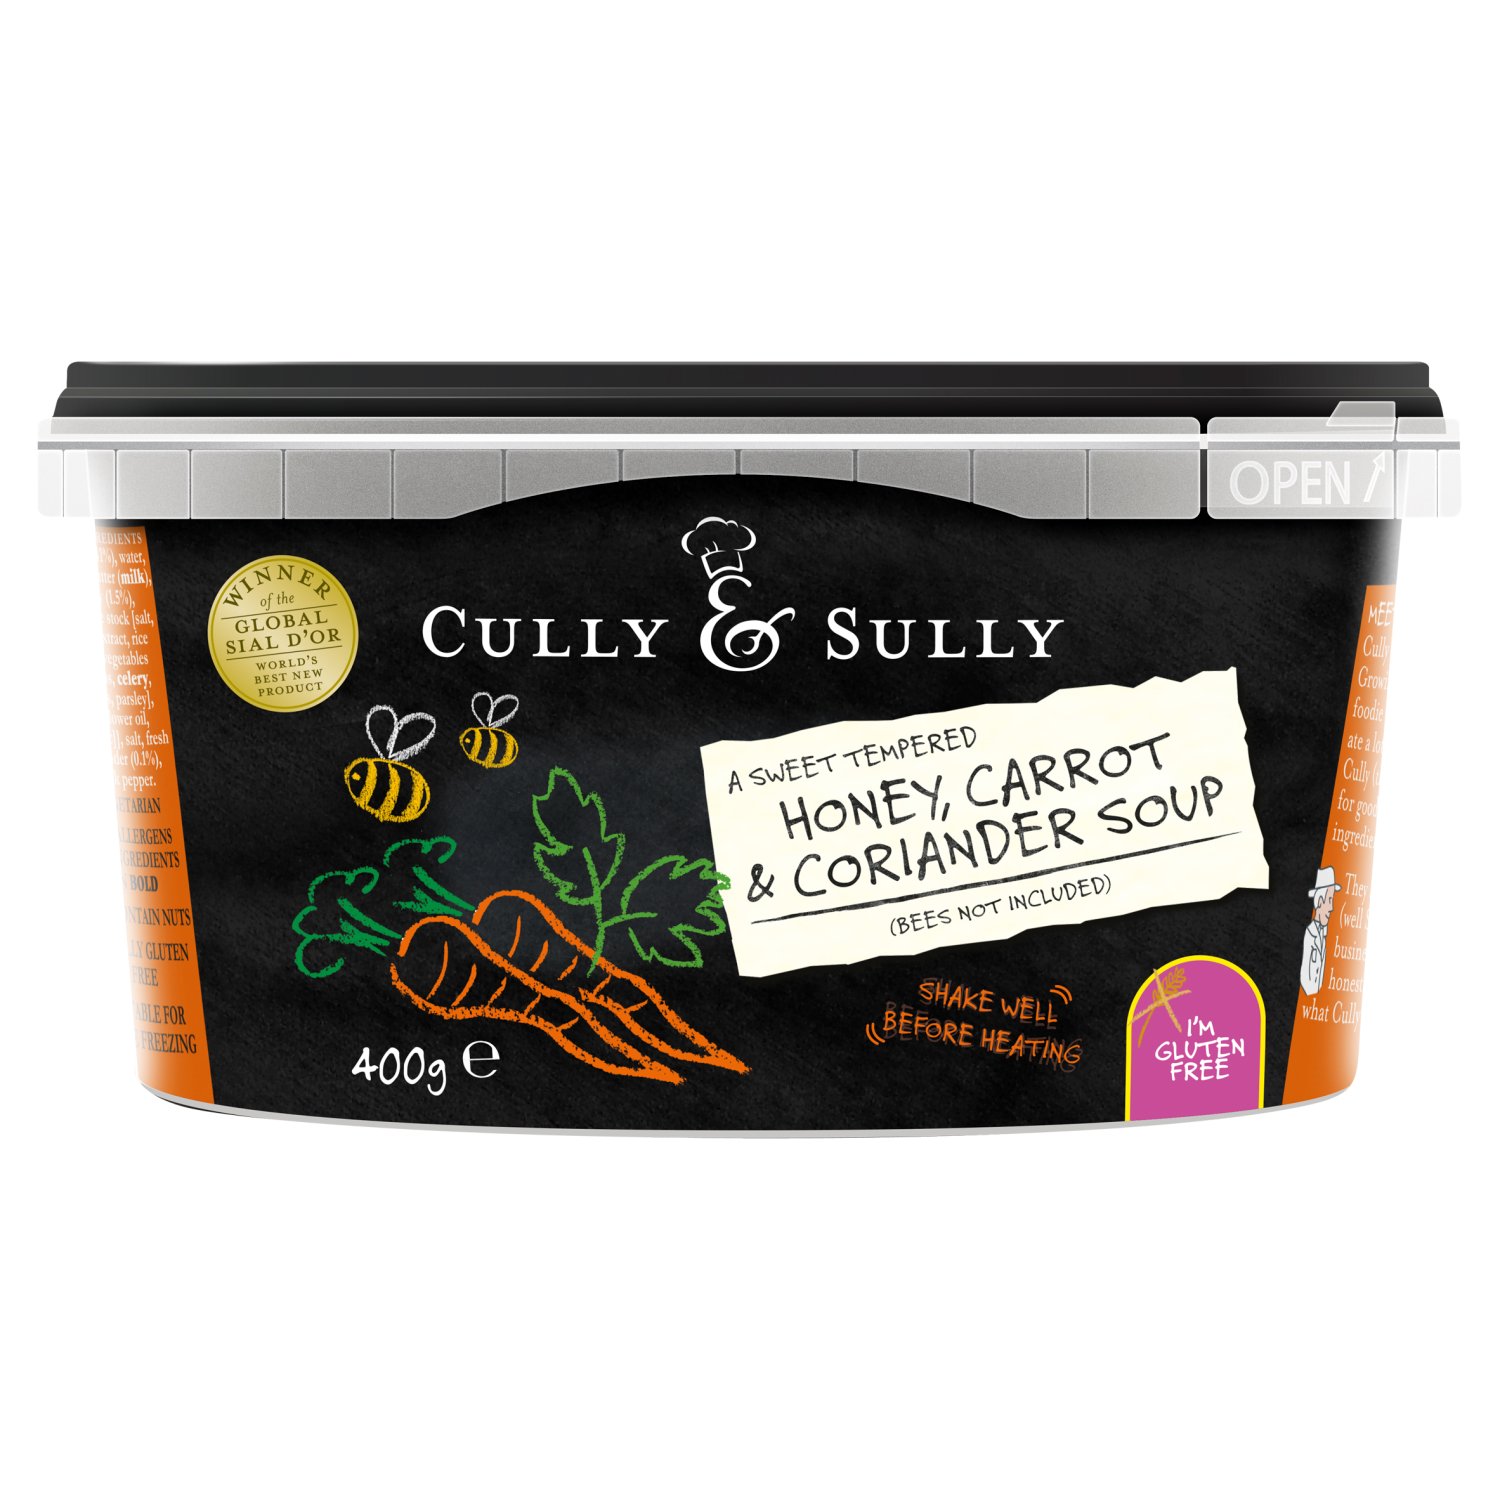 Meet Cully & Sully
Cully & Sully love food. Growing up in Ireland's foodie capital, Cork, they ate a lot of good food, Cully (the cook) knows that for good food you need great ingredients.
They also love business (well Sully does!!). The business of making good honest & tasty food is what Cully & Sully do best!